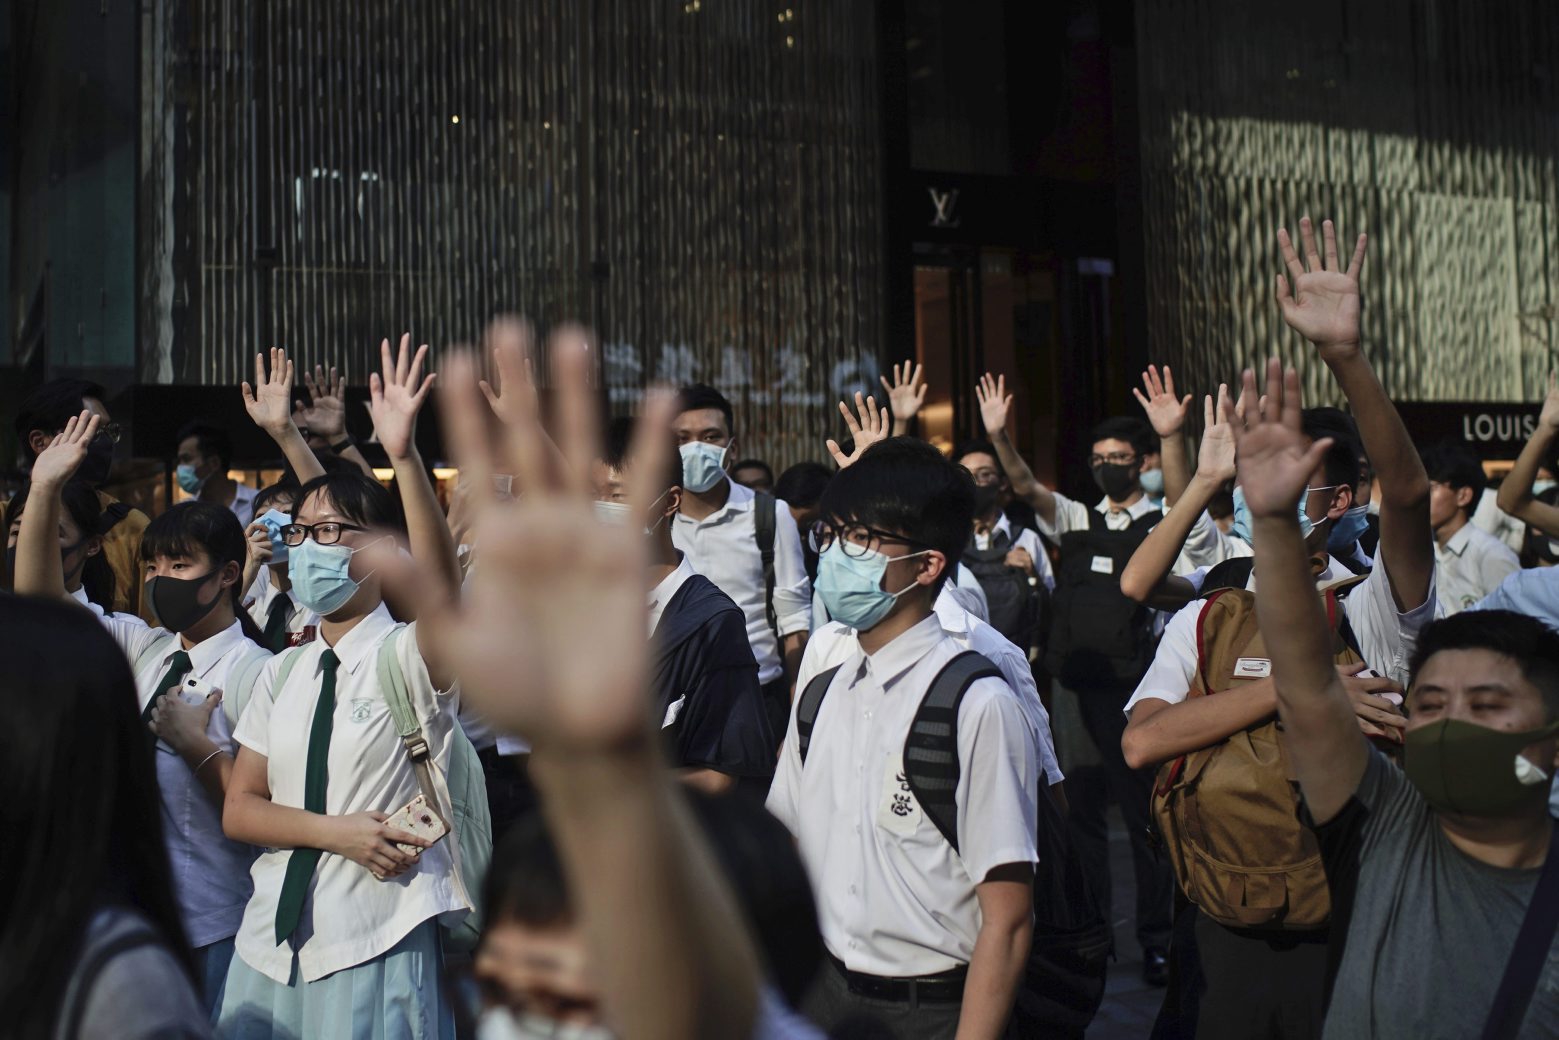 Protesters wear masks and hold up their hands to represent their five demands in Hong Kong Friday, Oct. 4, 2019. Hong Kong pro-democracy protesters marched in the city center Friday ahead of plans by the city's embattled leader to deploy emergency powers to ban people from wearing masks in a bid to quash four months of anti-government demonstrations. (AP Photo/Felipe Dana) Hong Kong Protests